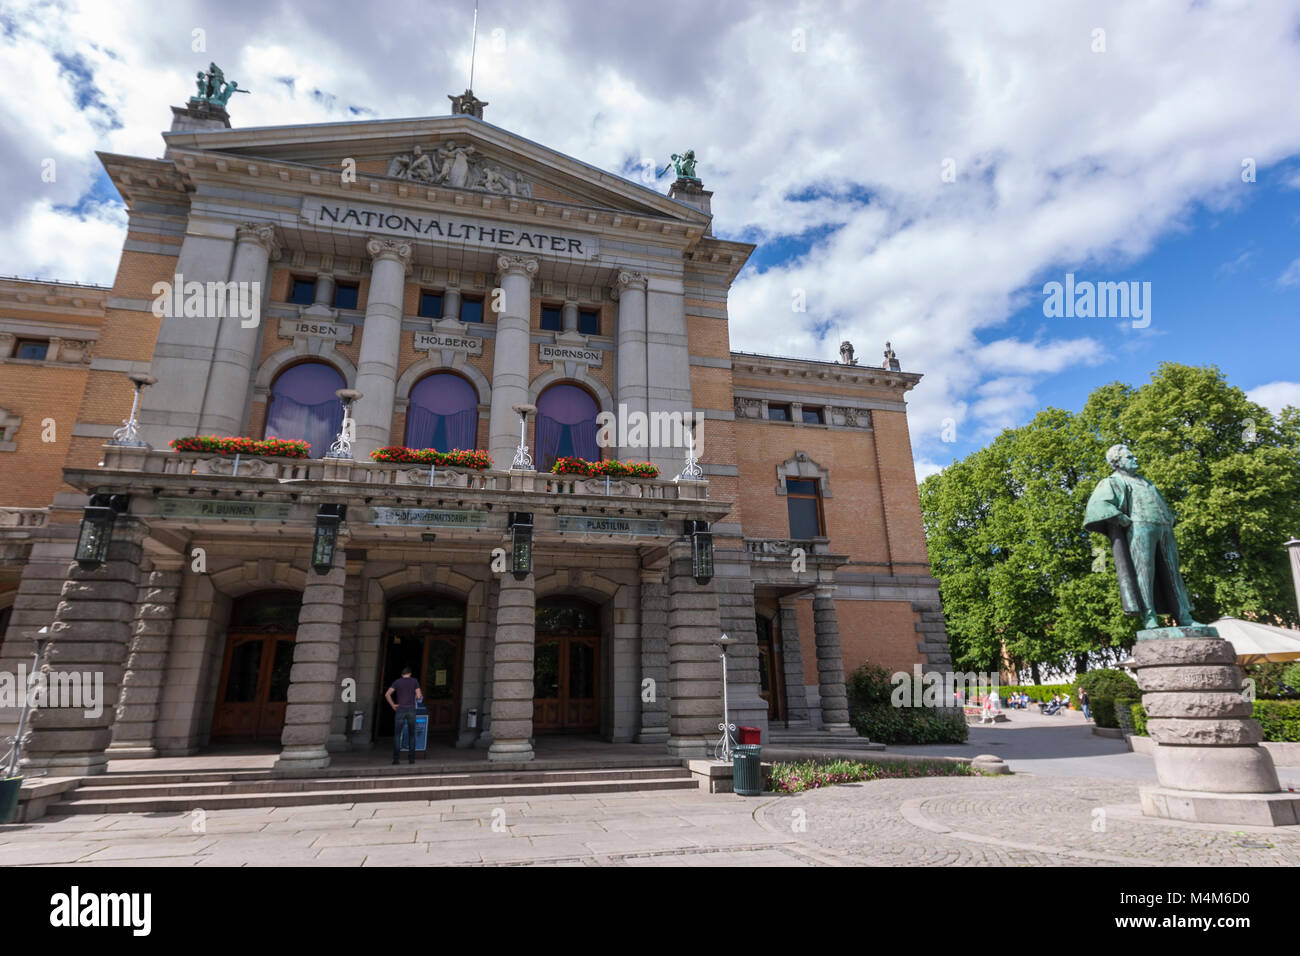 The statue of Bjornson in front of the National Theater, Oslo, Norway Stock Photo